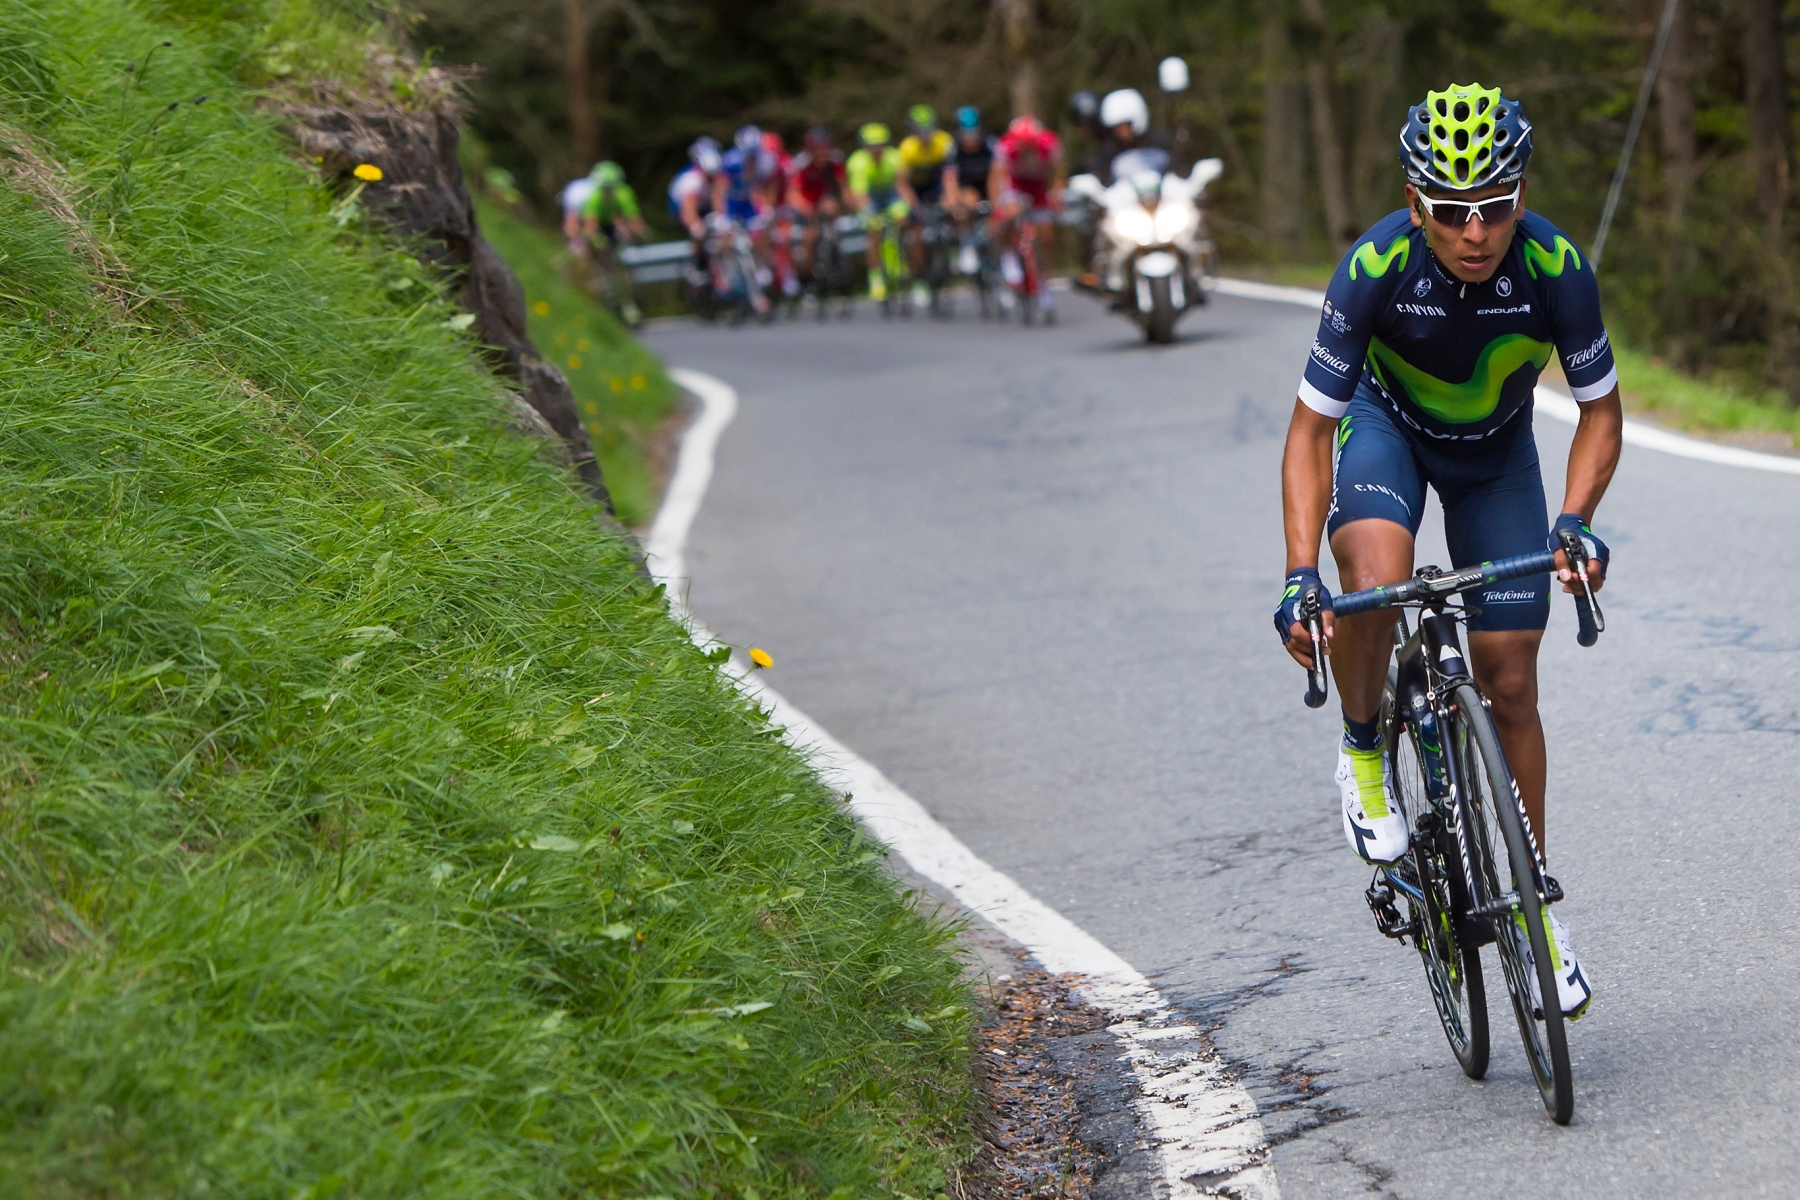 The winner and the new overall leader Nairo Quintana from Colombia of team Movistar, rides during the second stage, a 173.9 km race between Moudon and Morgins during the 70th Tour de Romandie UCI ProTour cycling race near Morgins, Switzerland, Thursday, April 28, 2016. (KEYSTONE/Jean-Christophe Bott) SWITZERLAND CYCLING TOUR DE ROMANDIE 2016